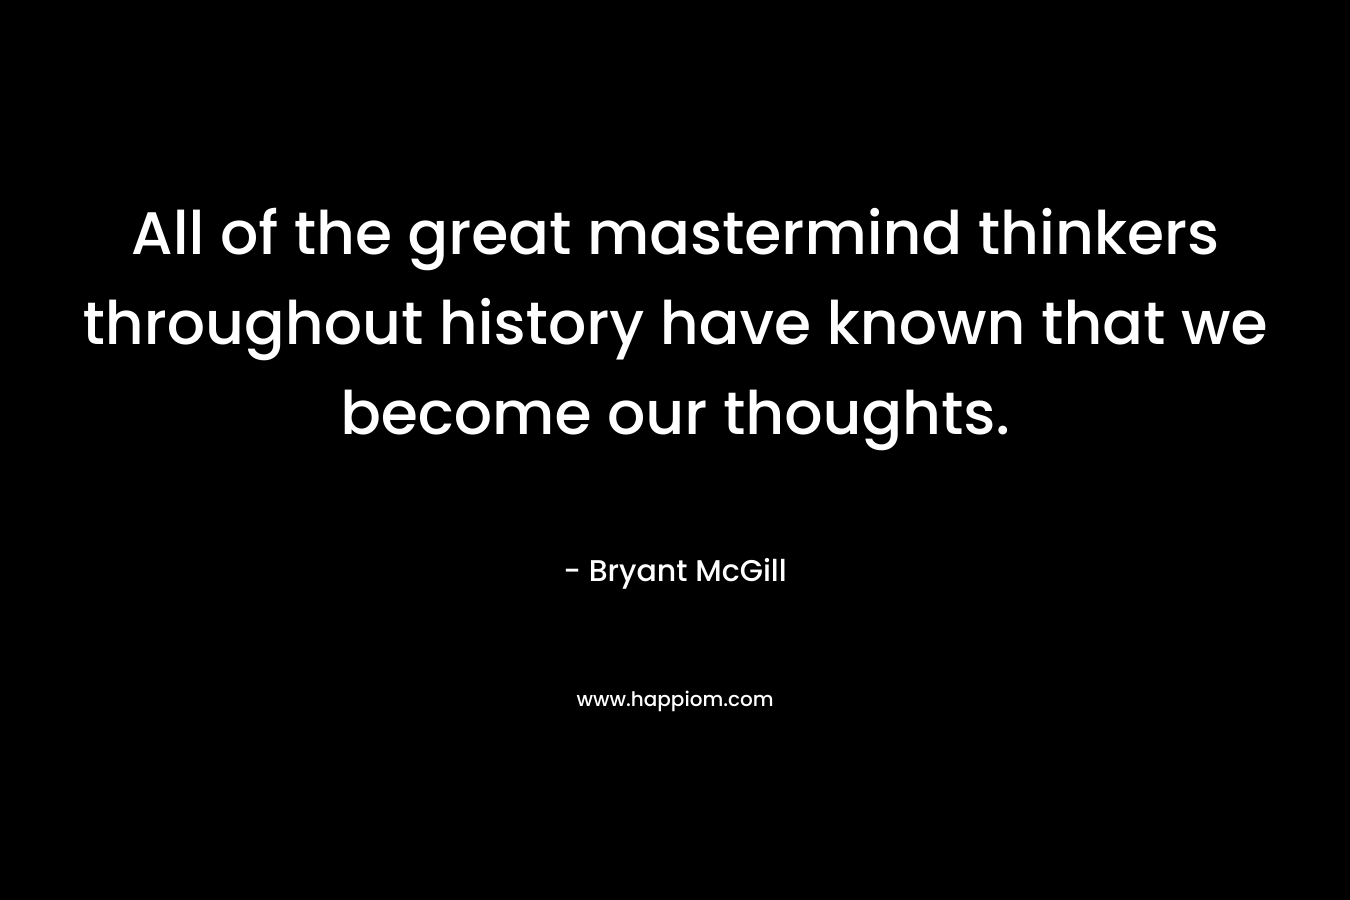 All of the great mastermind thinkers throughout history have known that we become our thoughts.